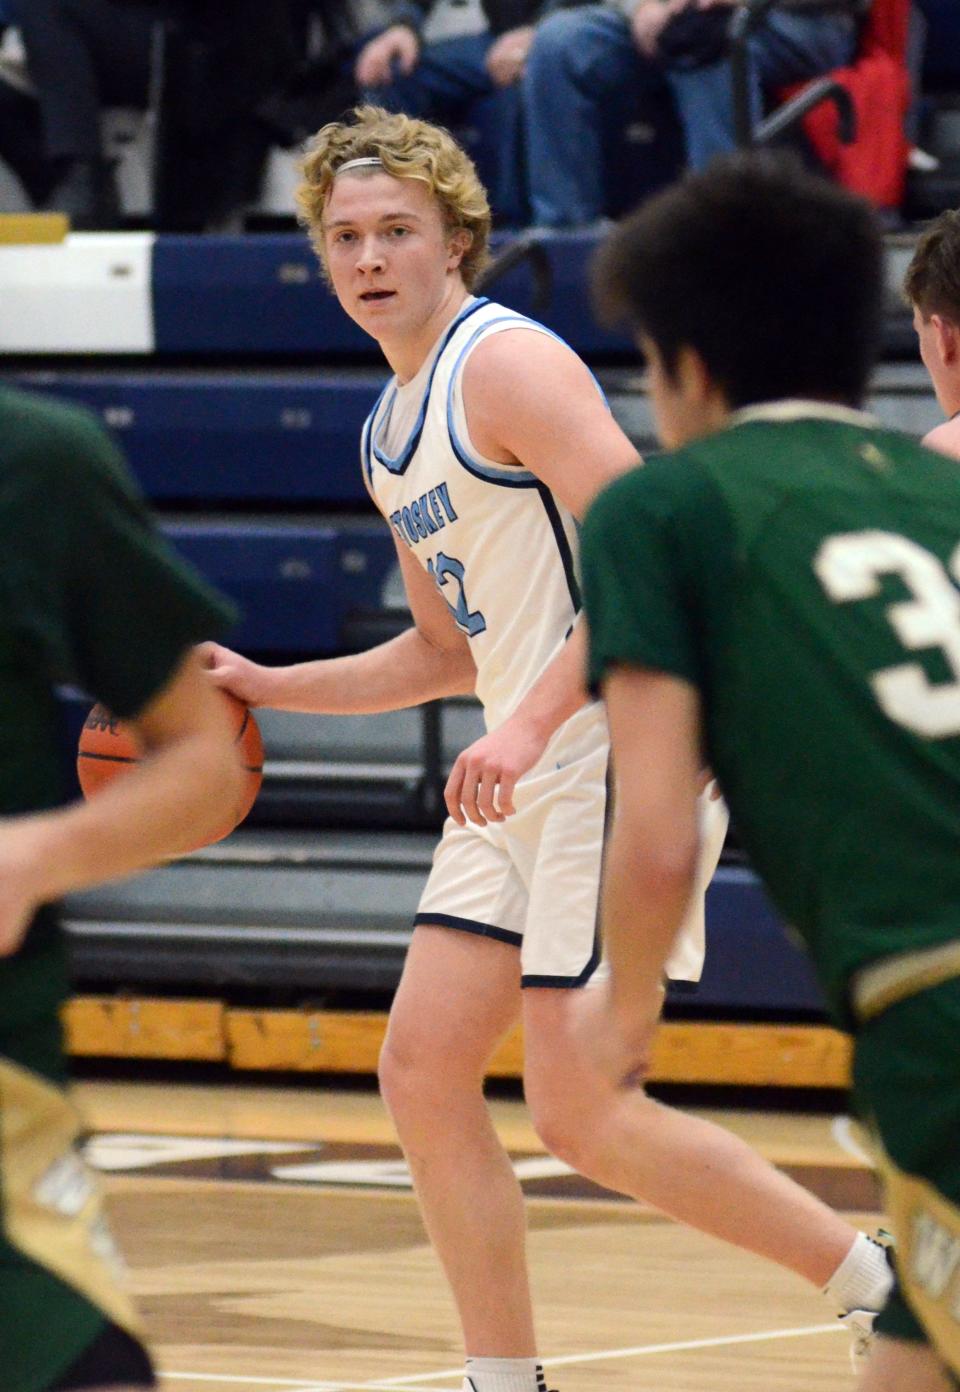 Petoskey's Michael Squires carried over a strong season on the soccer pitch to the basketball court and earned All-BNC.